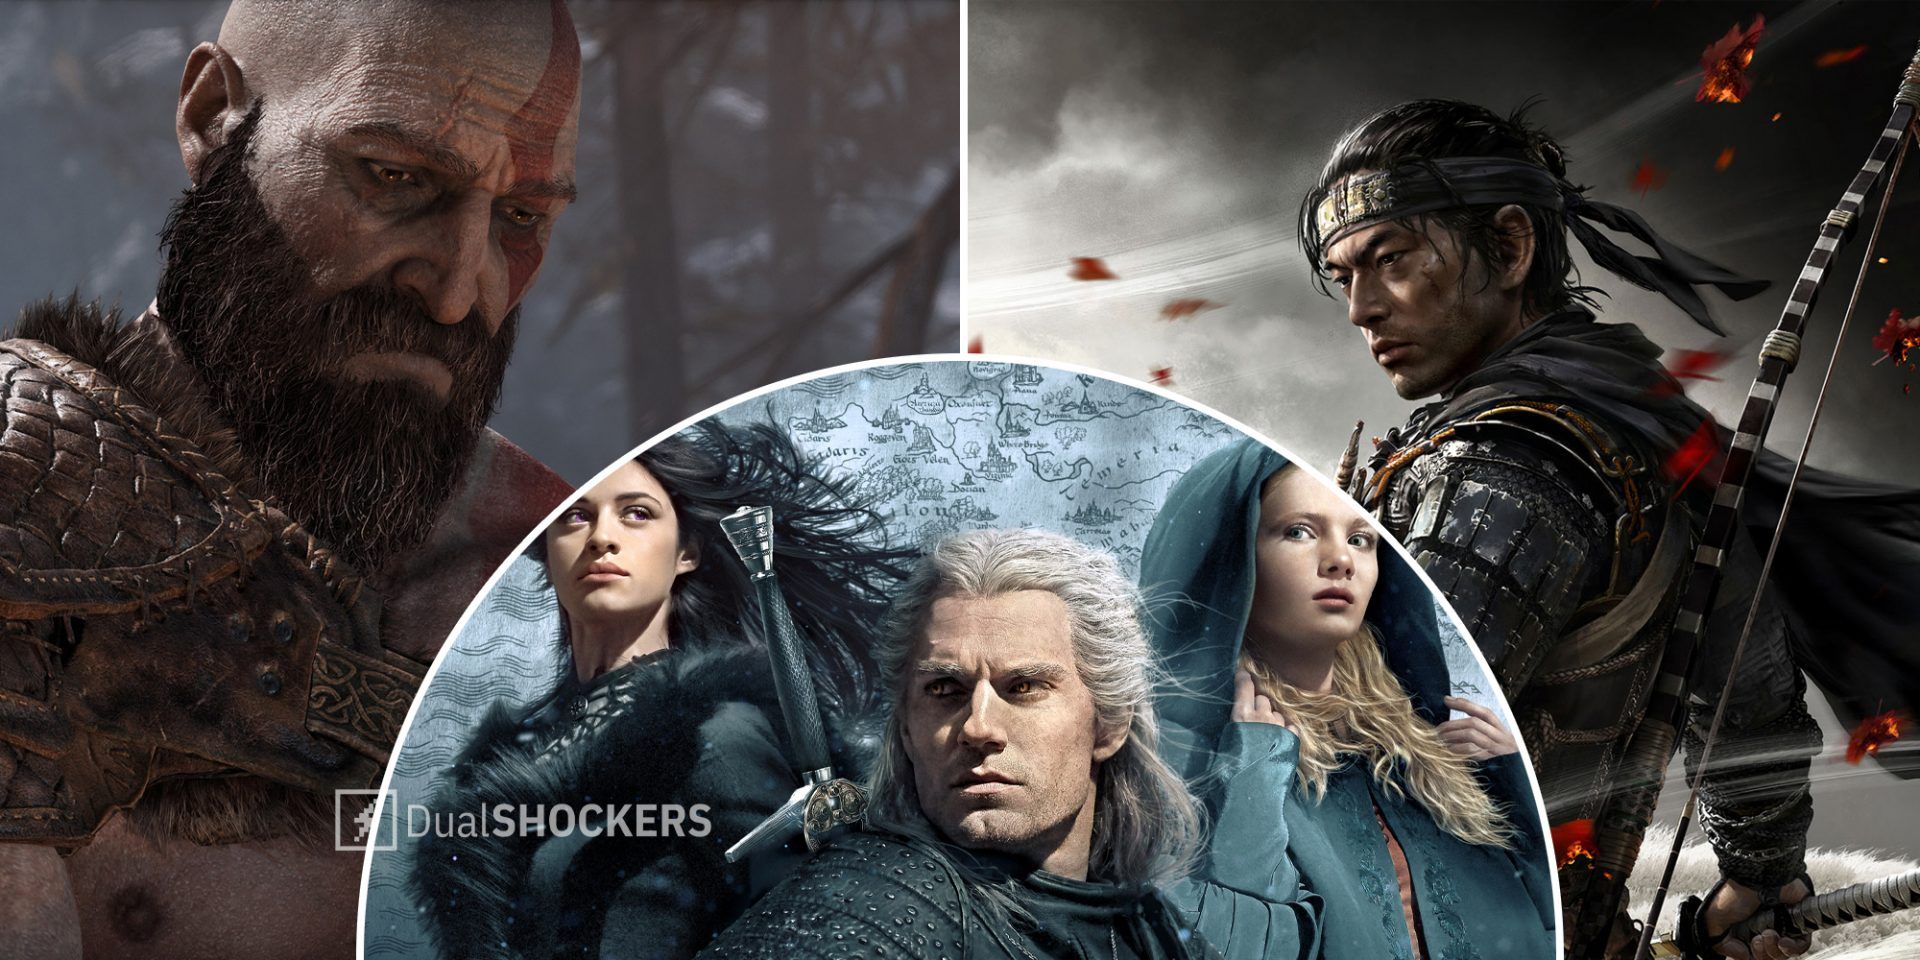 God of War Kratos on left, The Witcher characters in middle, Ghost of Tsushima Jin Sakai on right